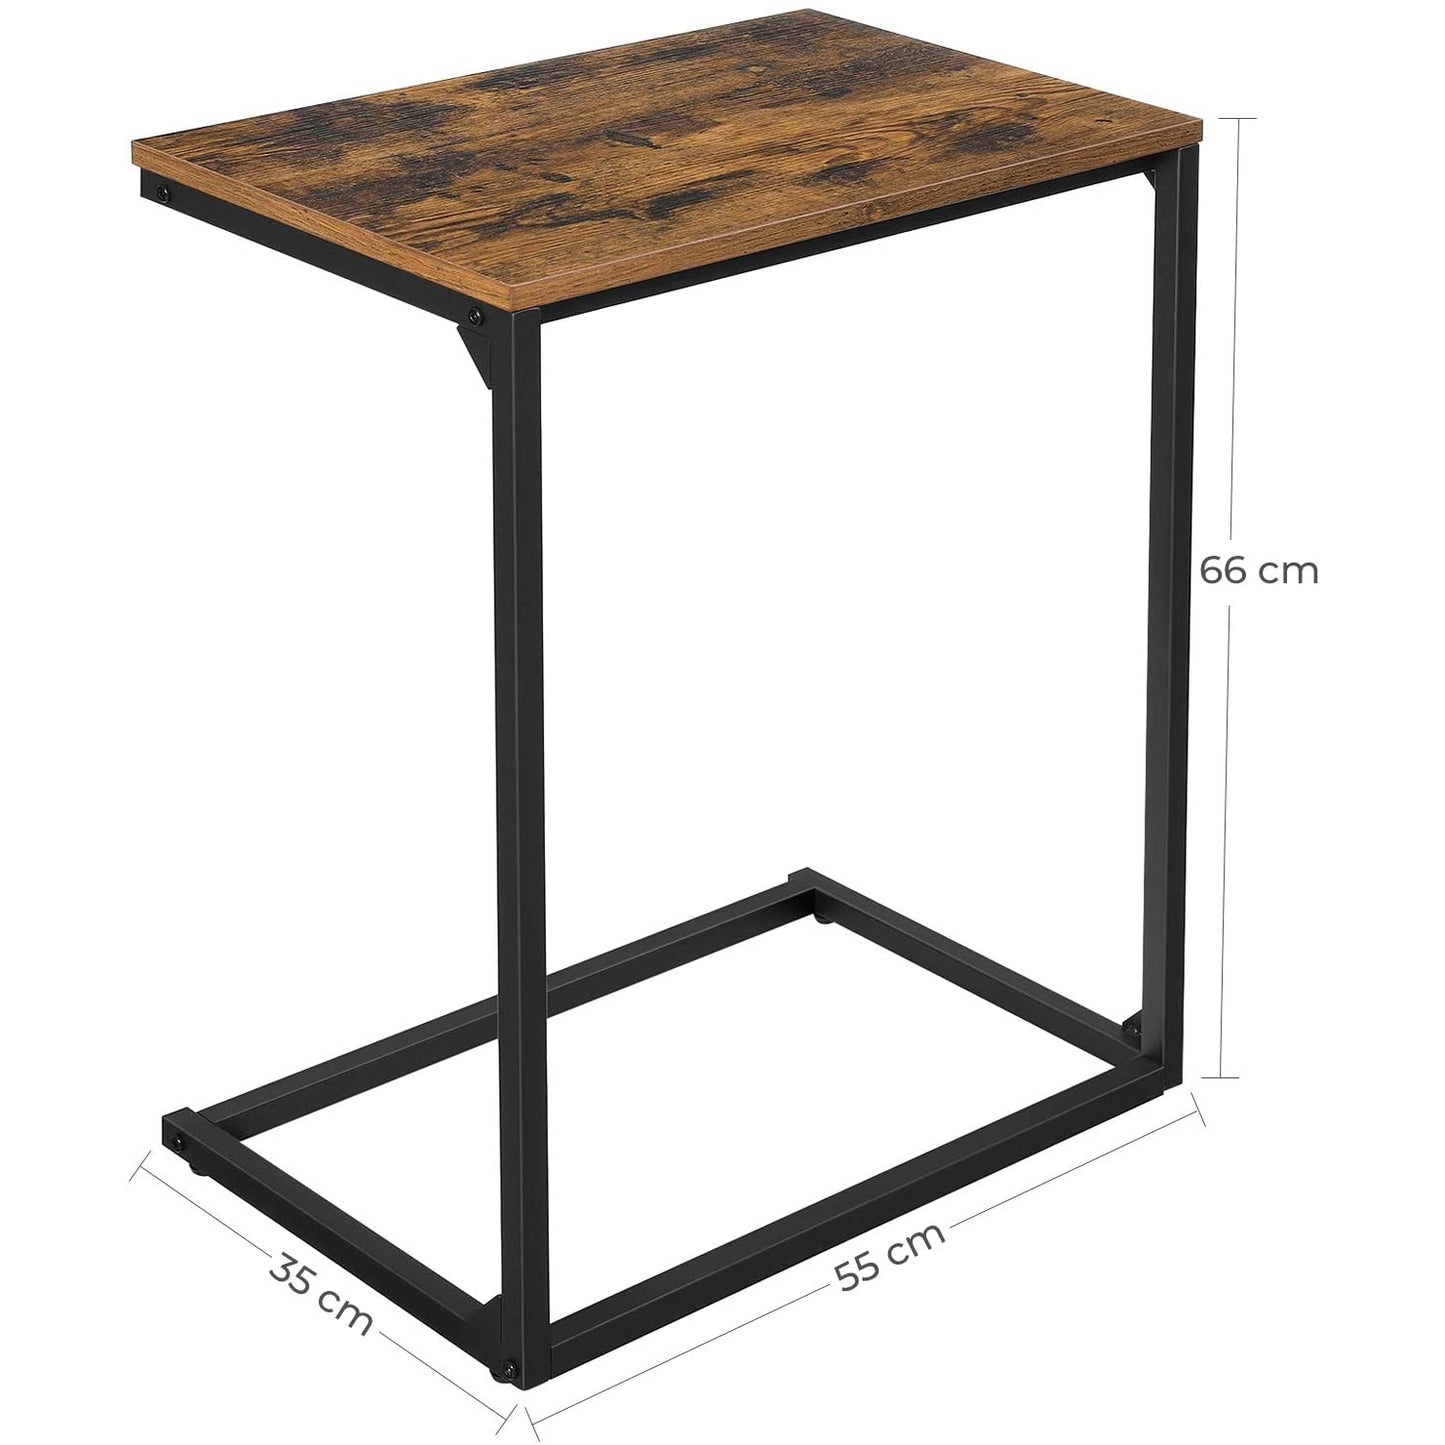 Nancy's Silicon 2 Side Table - Side Tables - Industrial - Vintage Brown and Black - 55 x 35 x 66 cm